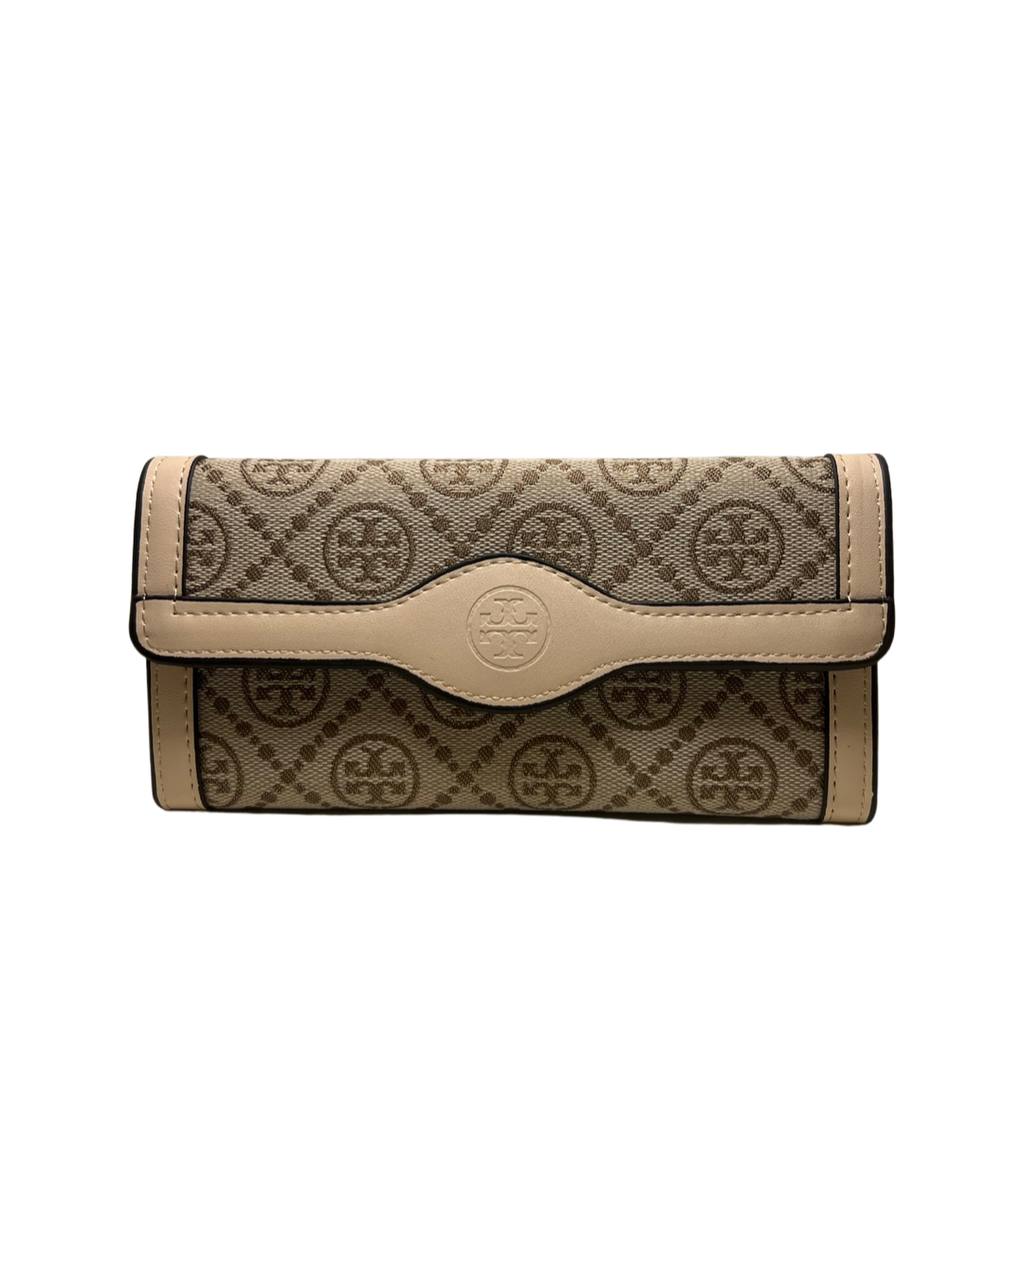 Tory Burch Large Women Wallet - Puzzles Egypt